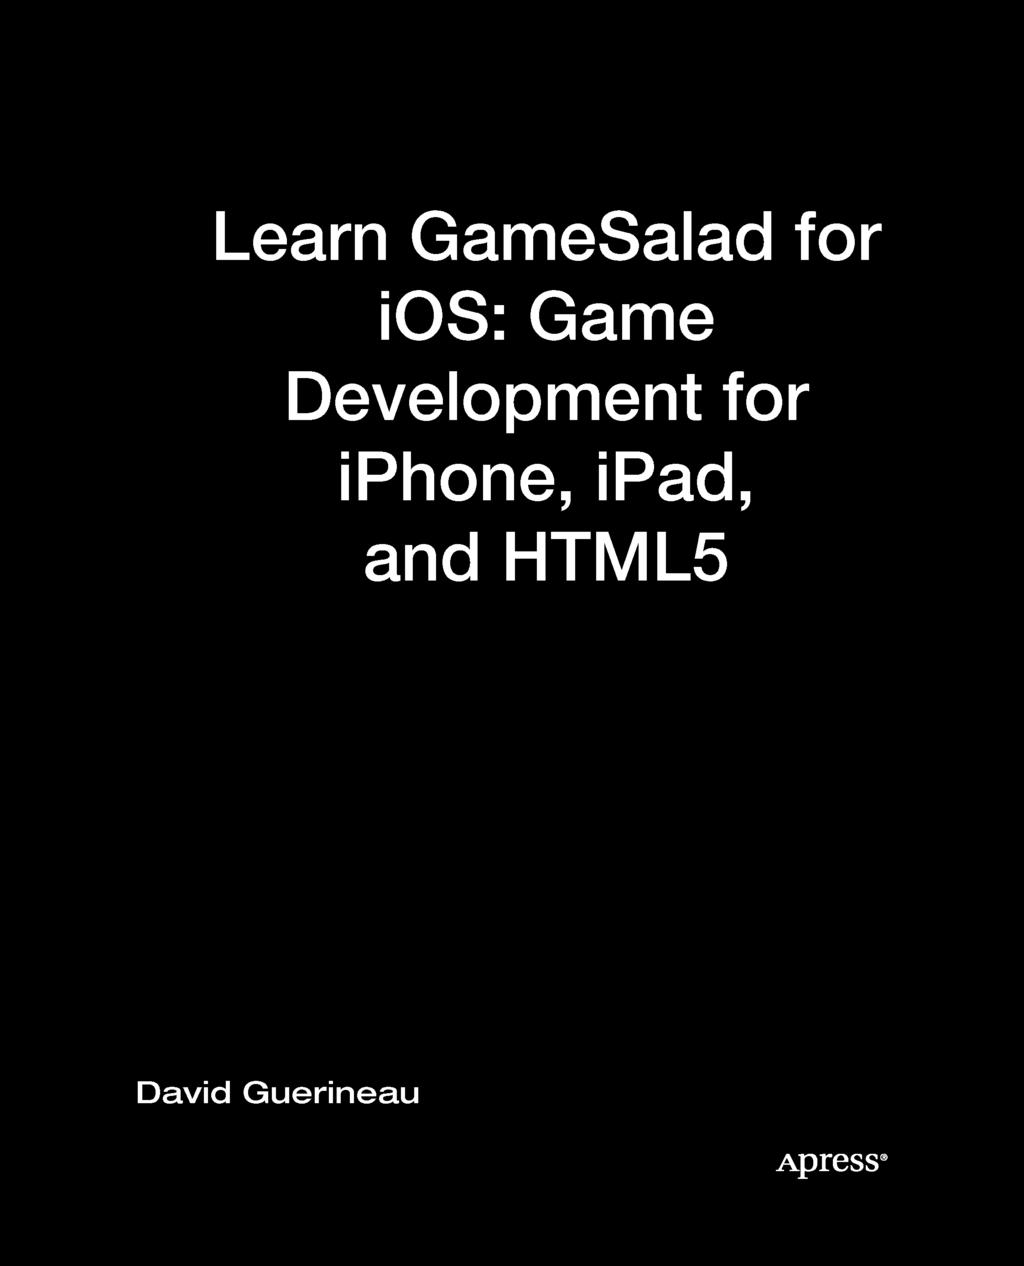 Learn GameSalad for